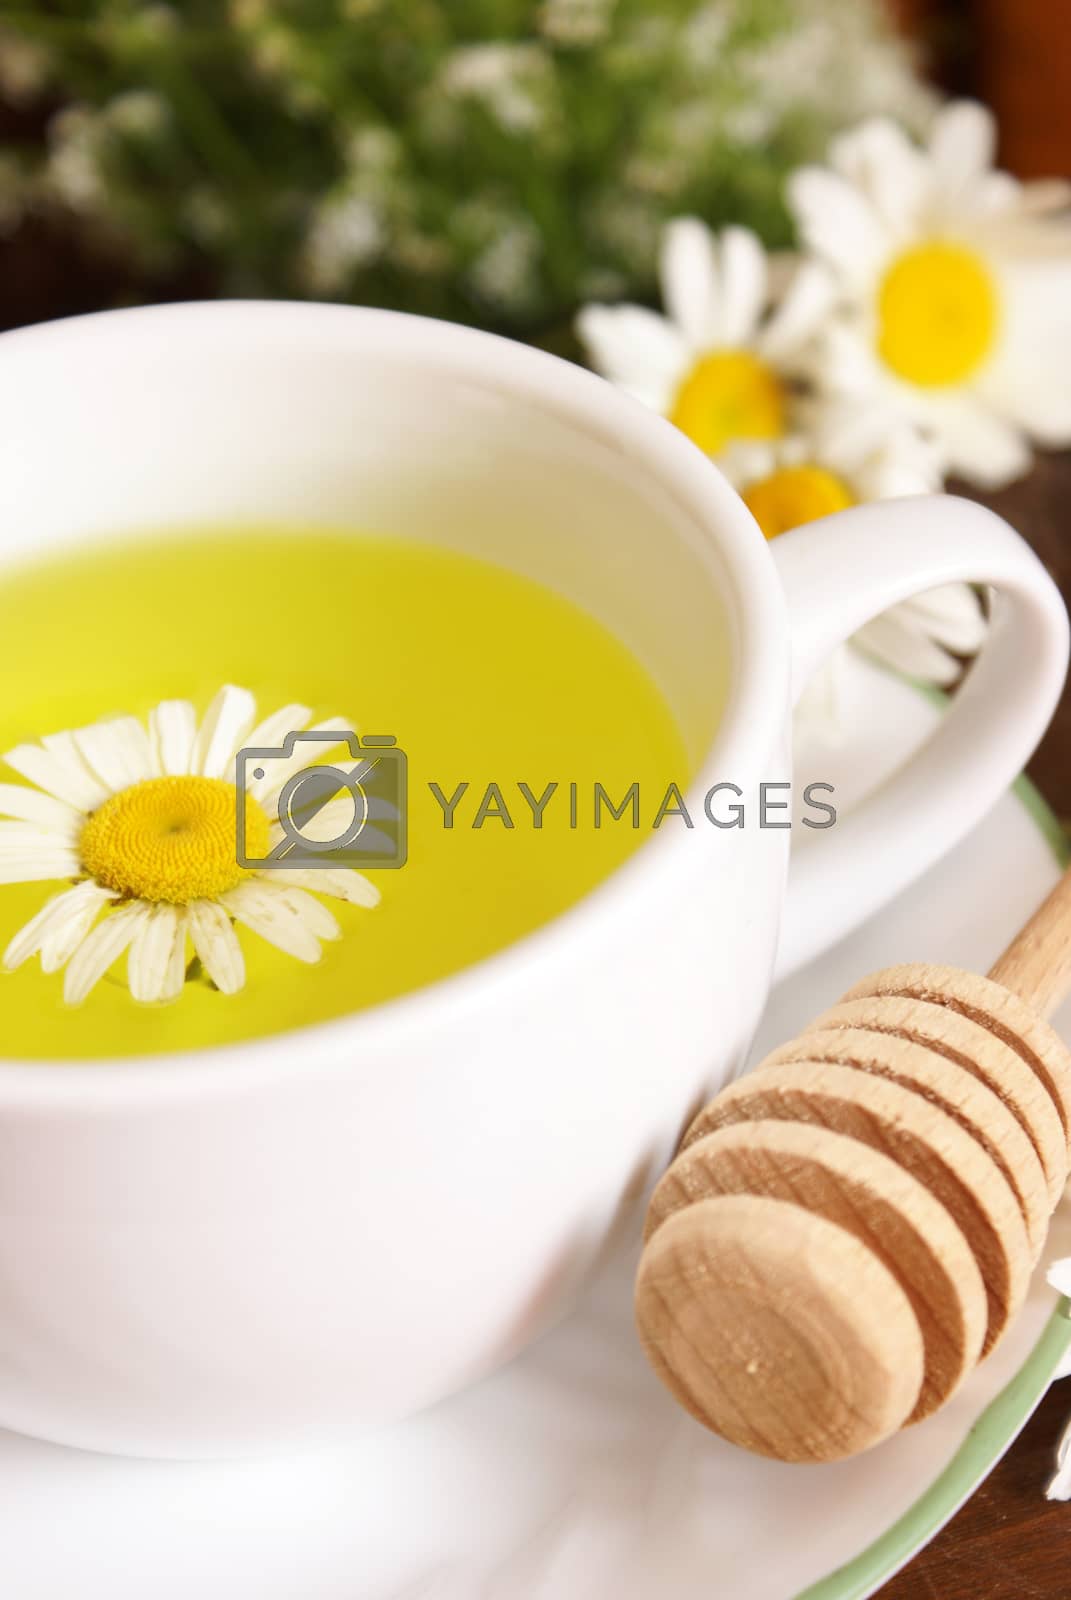 Royalty free image of Chamomile Tea And Honey by AlphaBaby